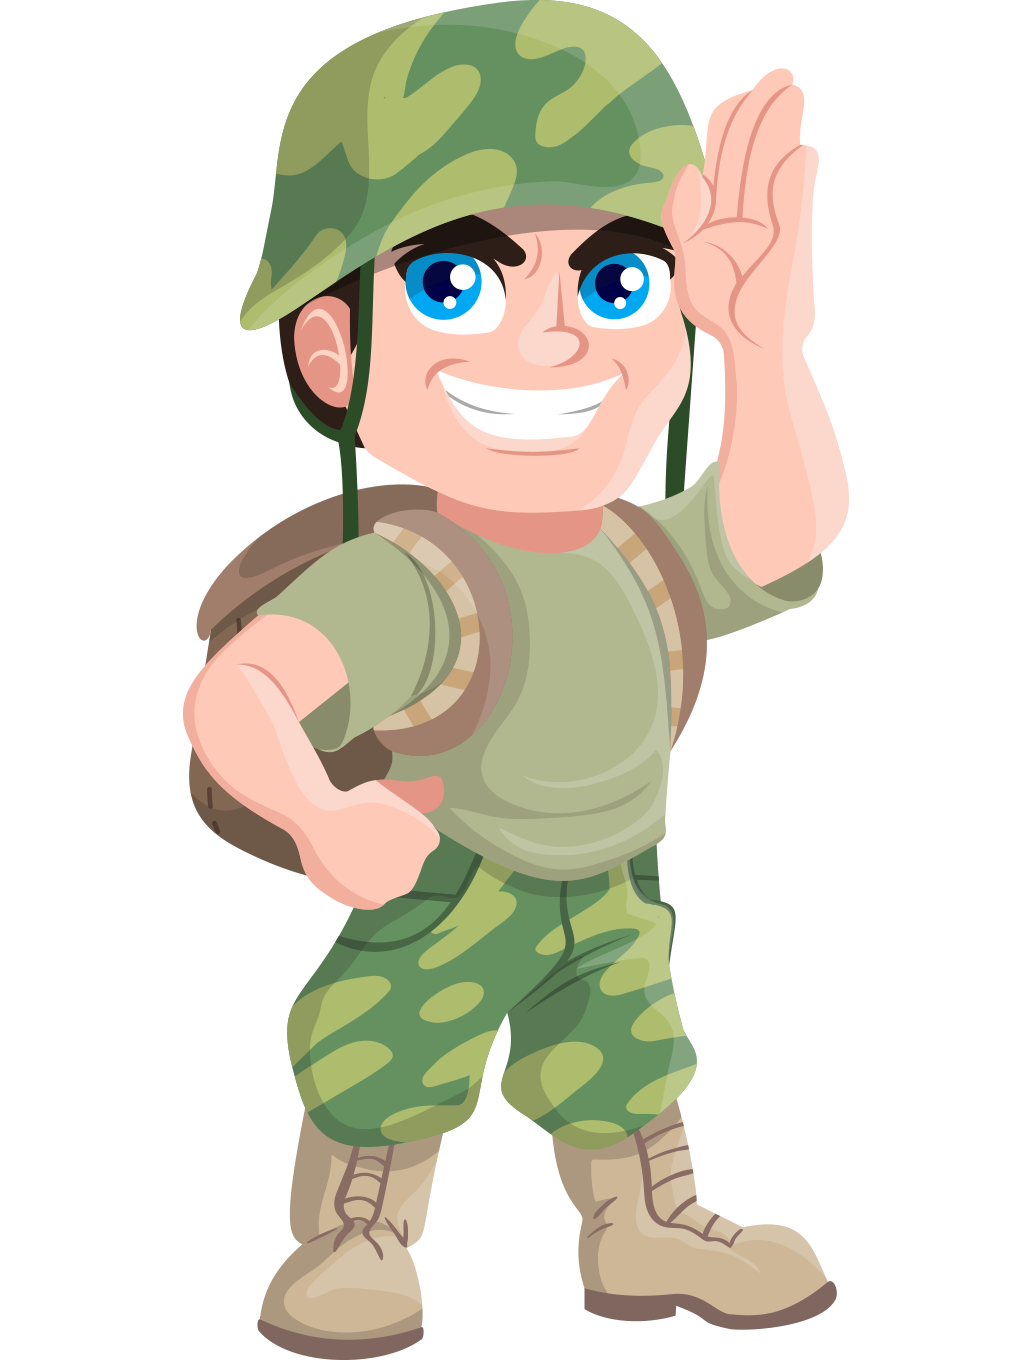 Soldier Free Content Military Clip Art Hand Painted Cartoon Salute